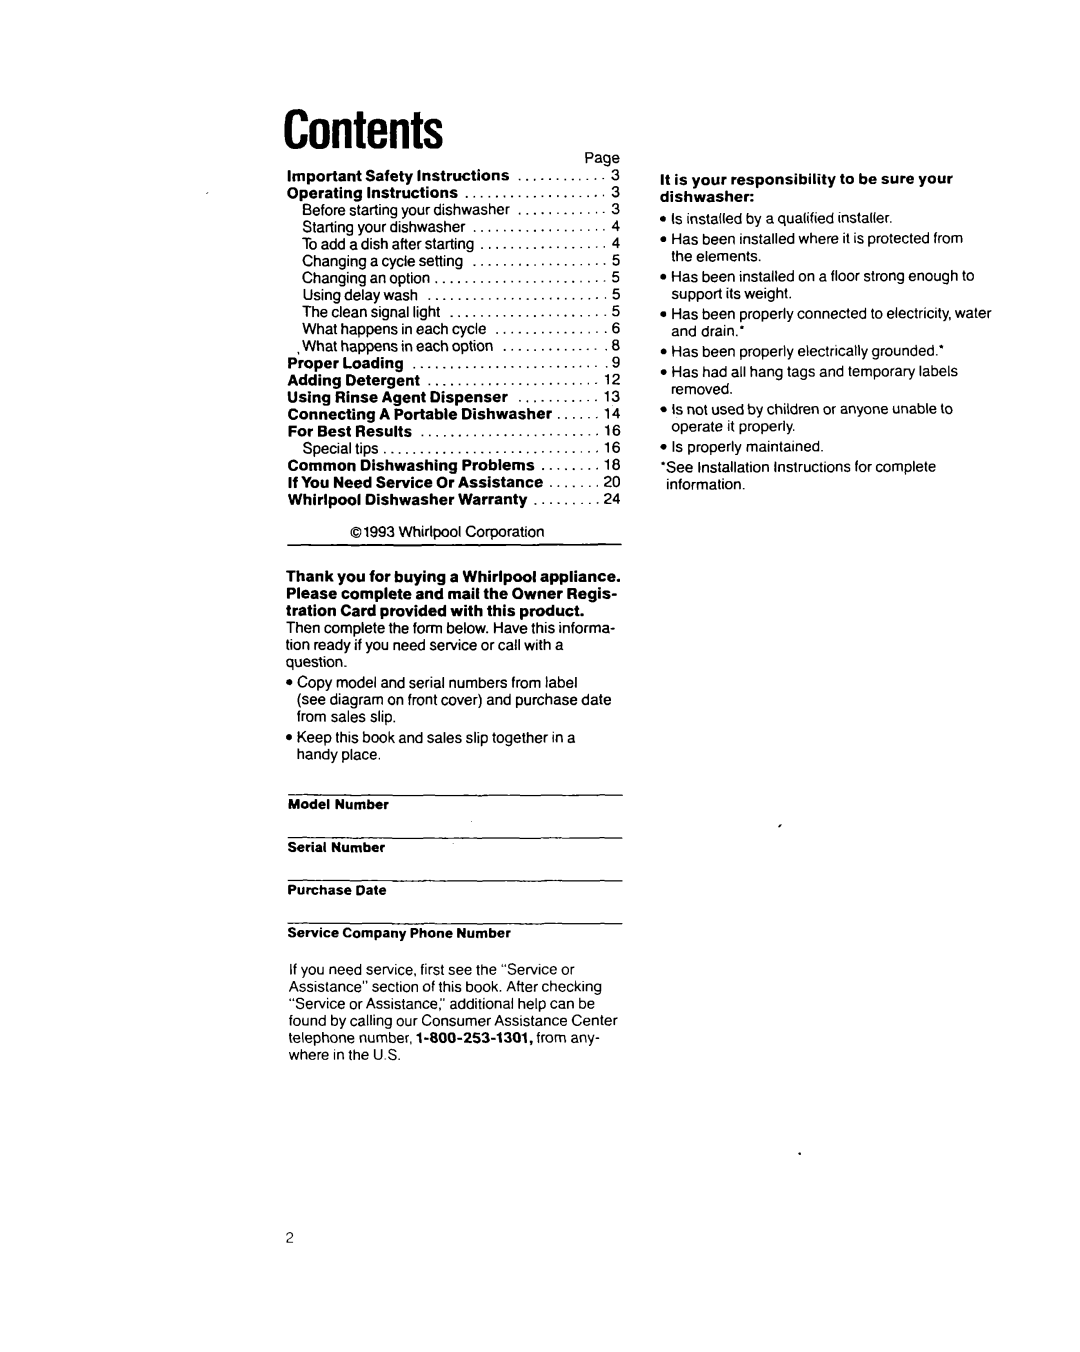 Whirlpool 8700 manual Contents 